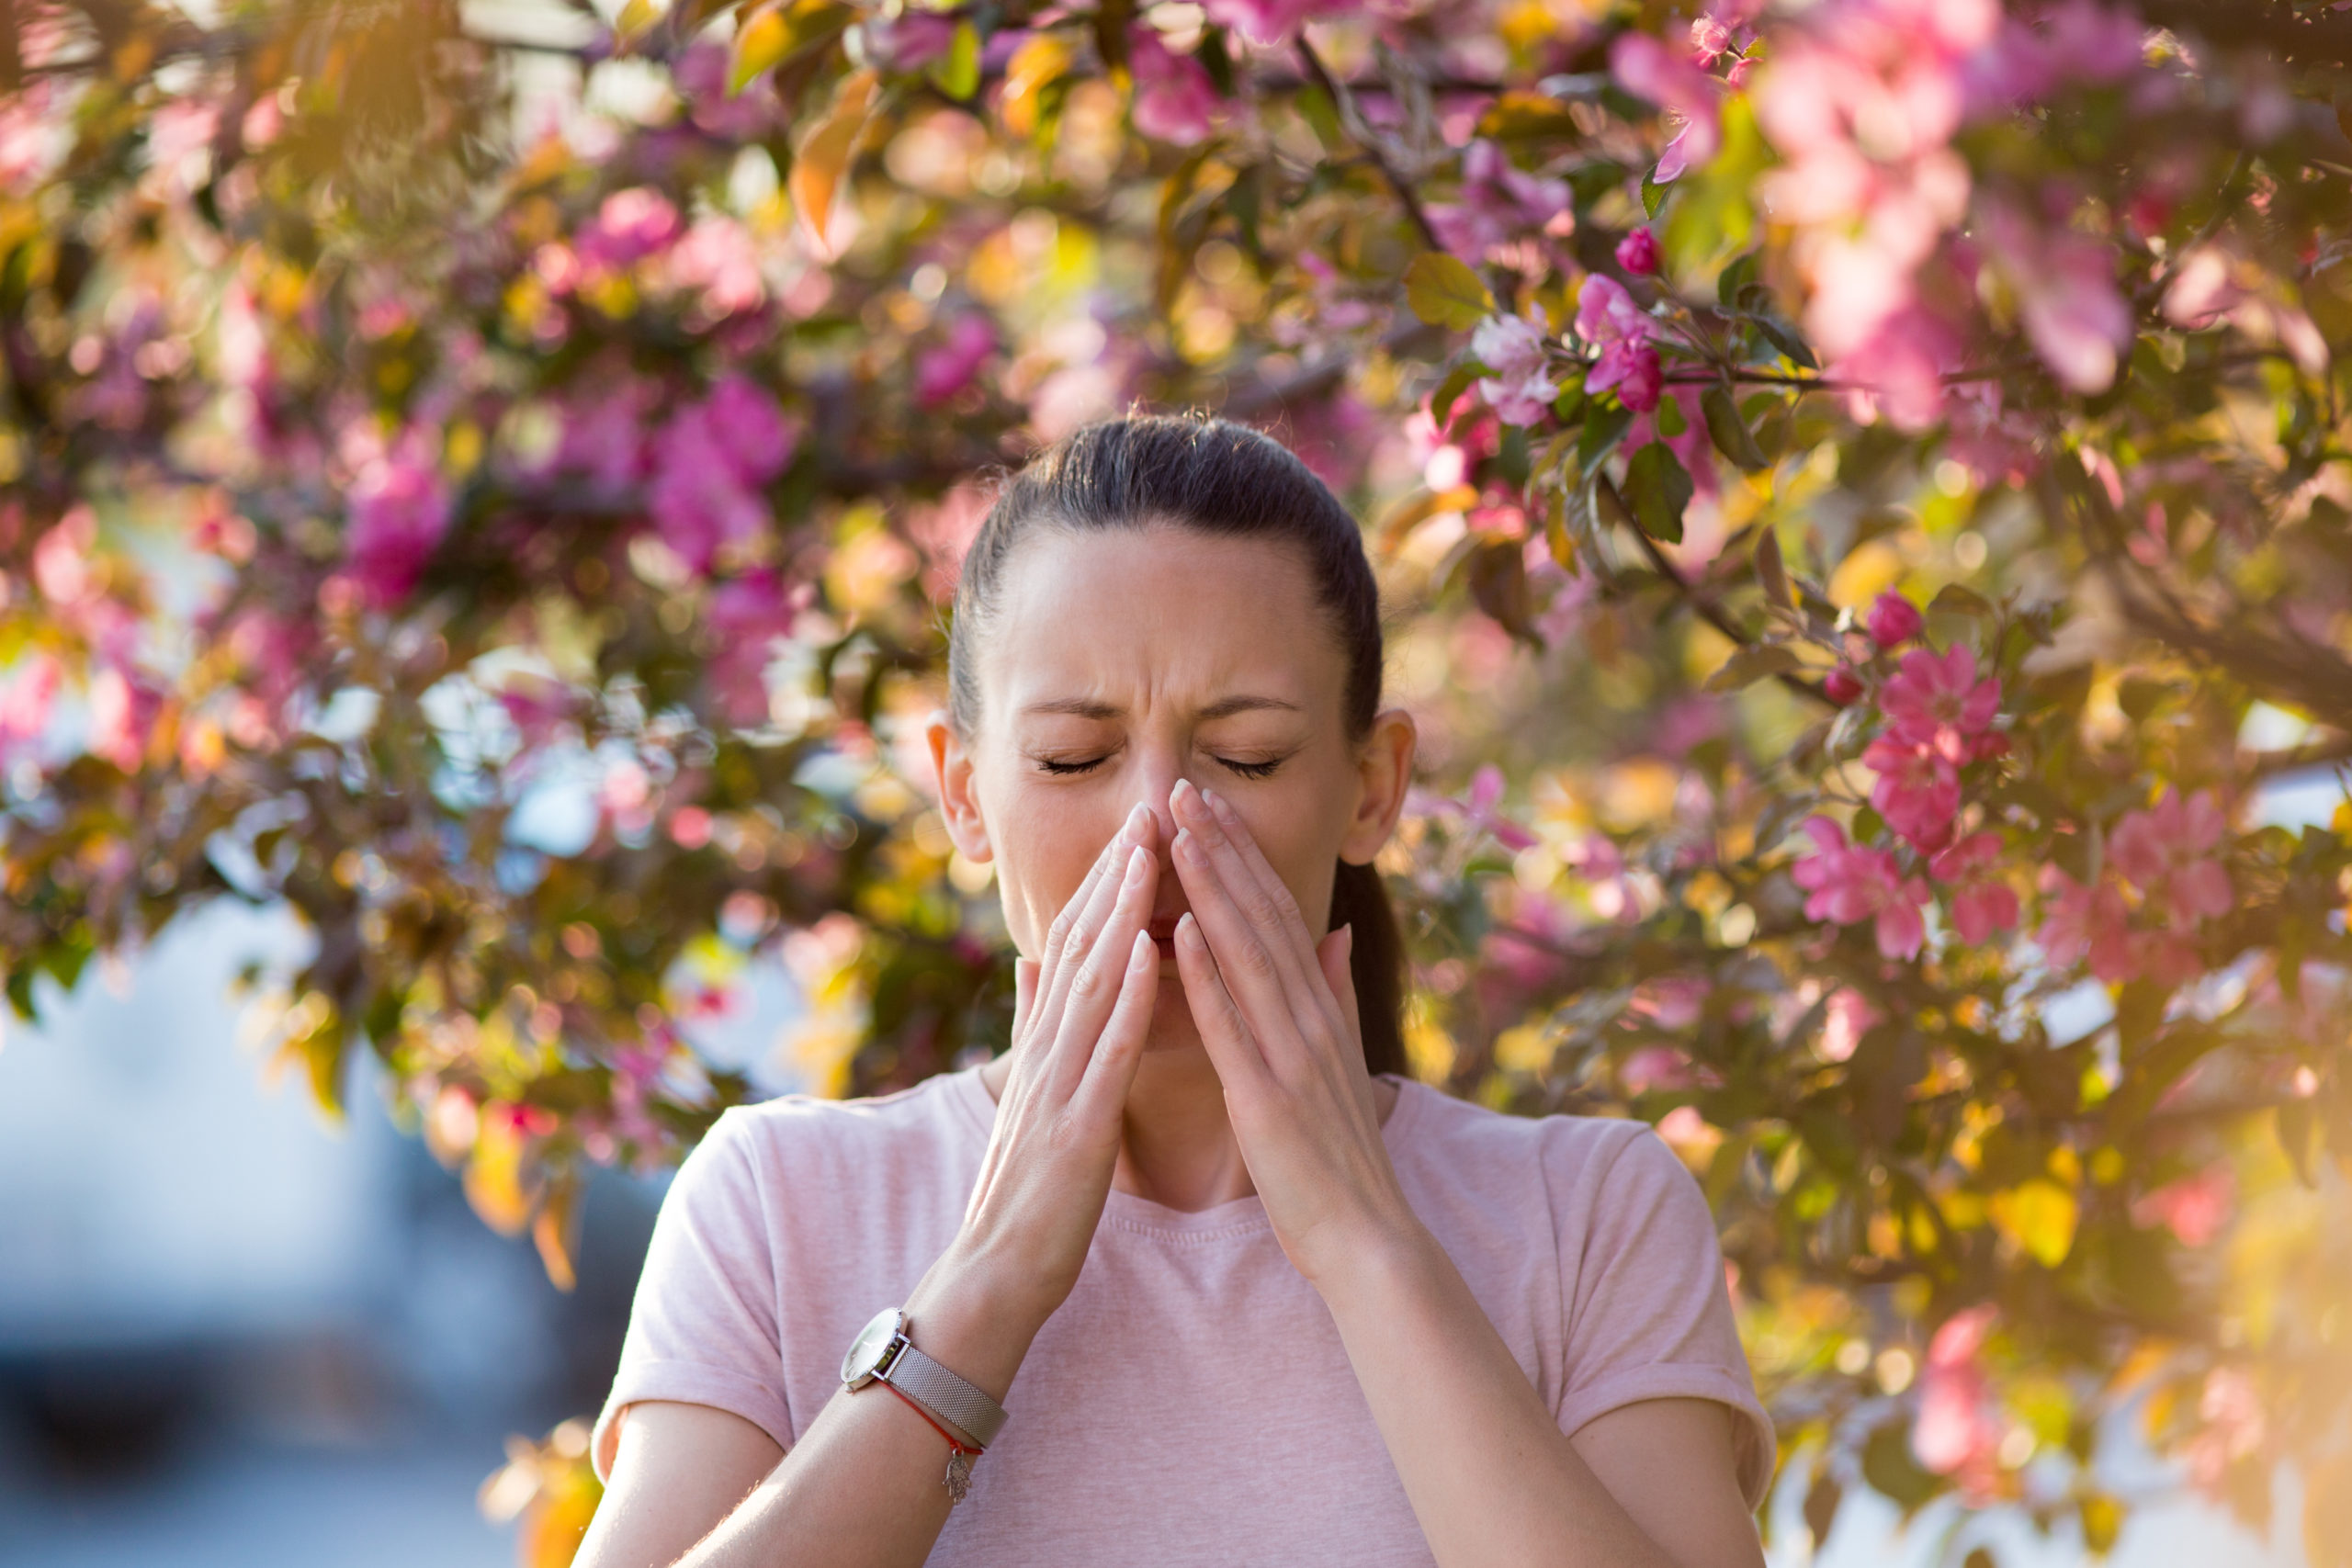 Image of a woman sneezing into her hands